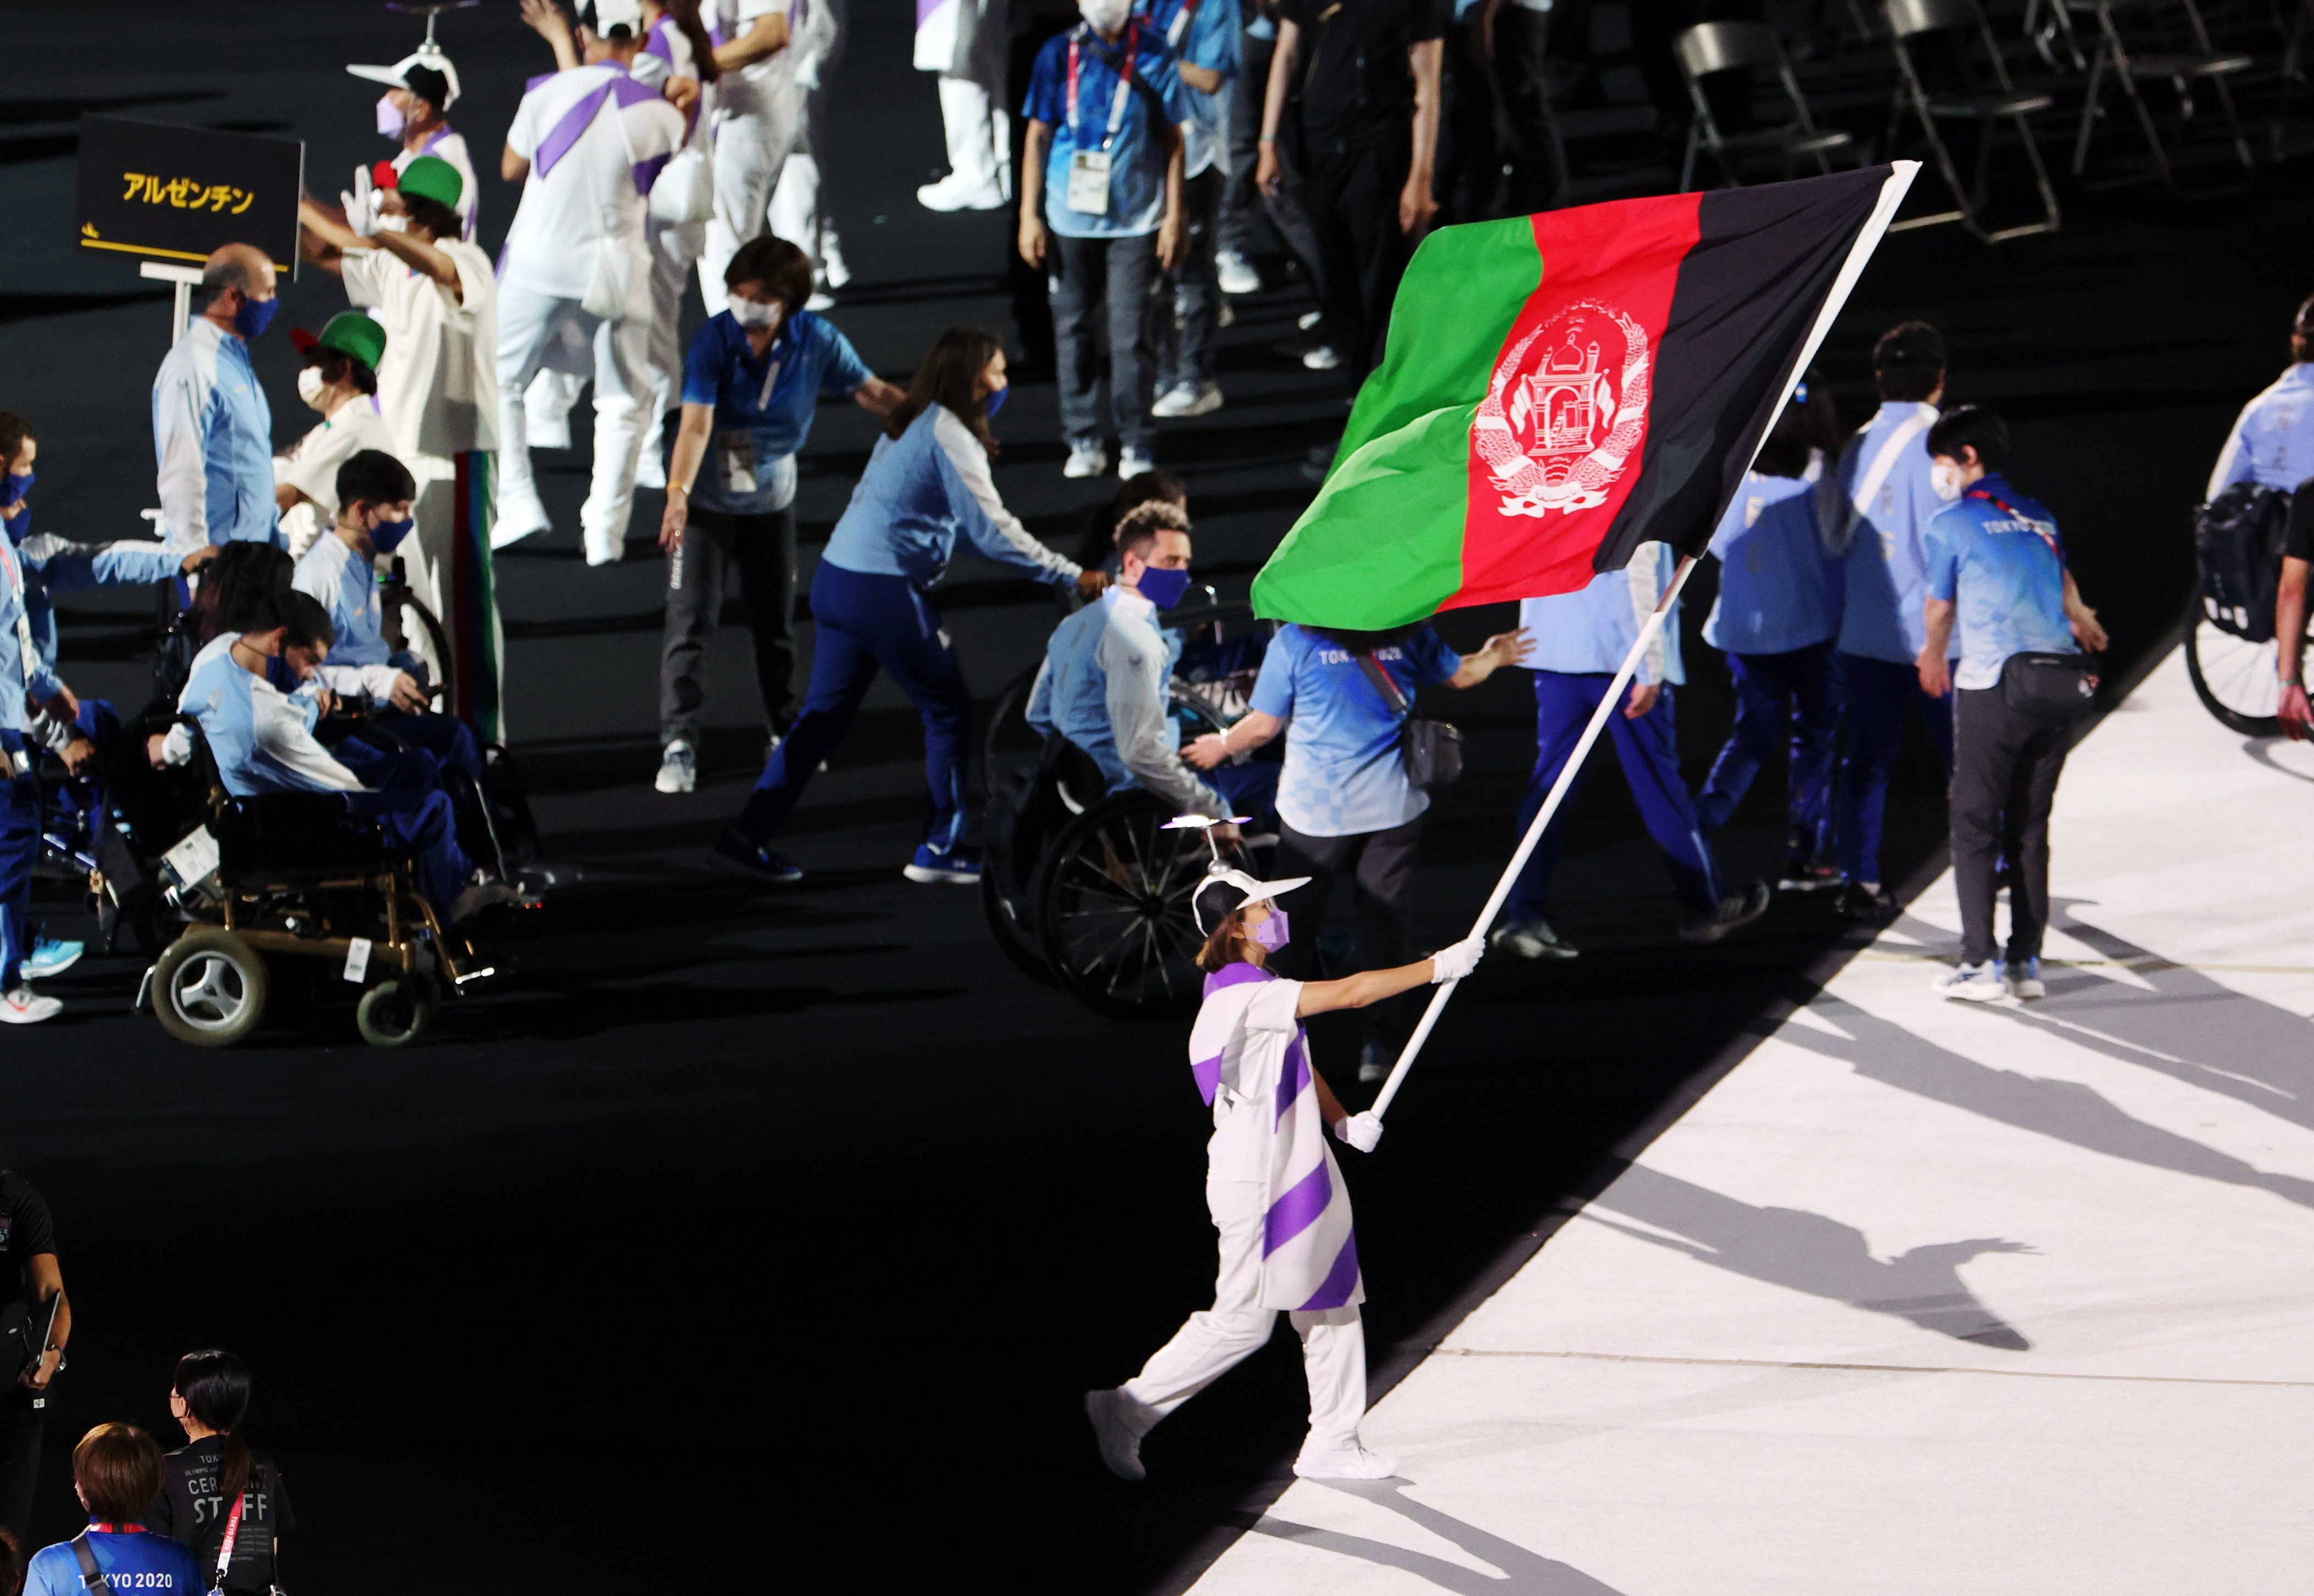 Two Afghan athletes arrive in Tokyo for Paralympics